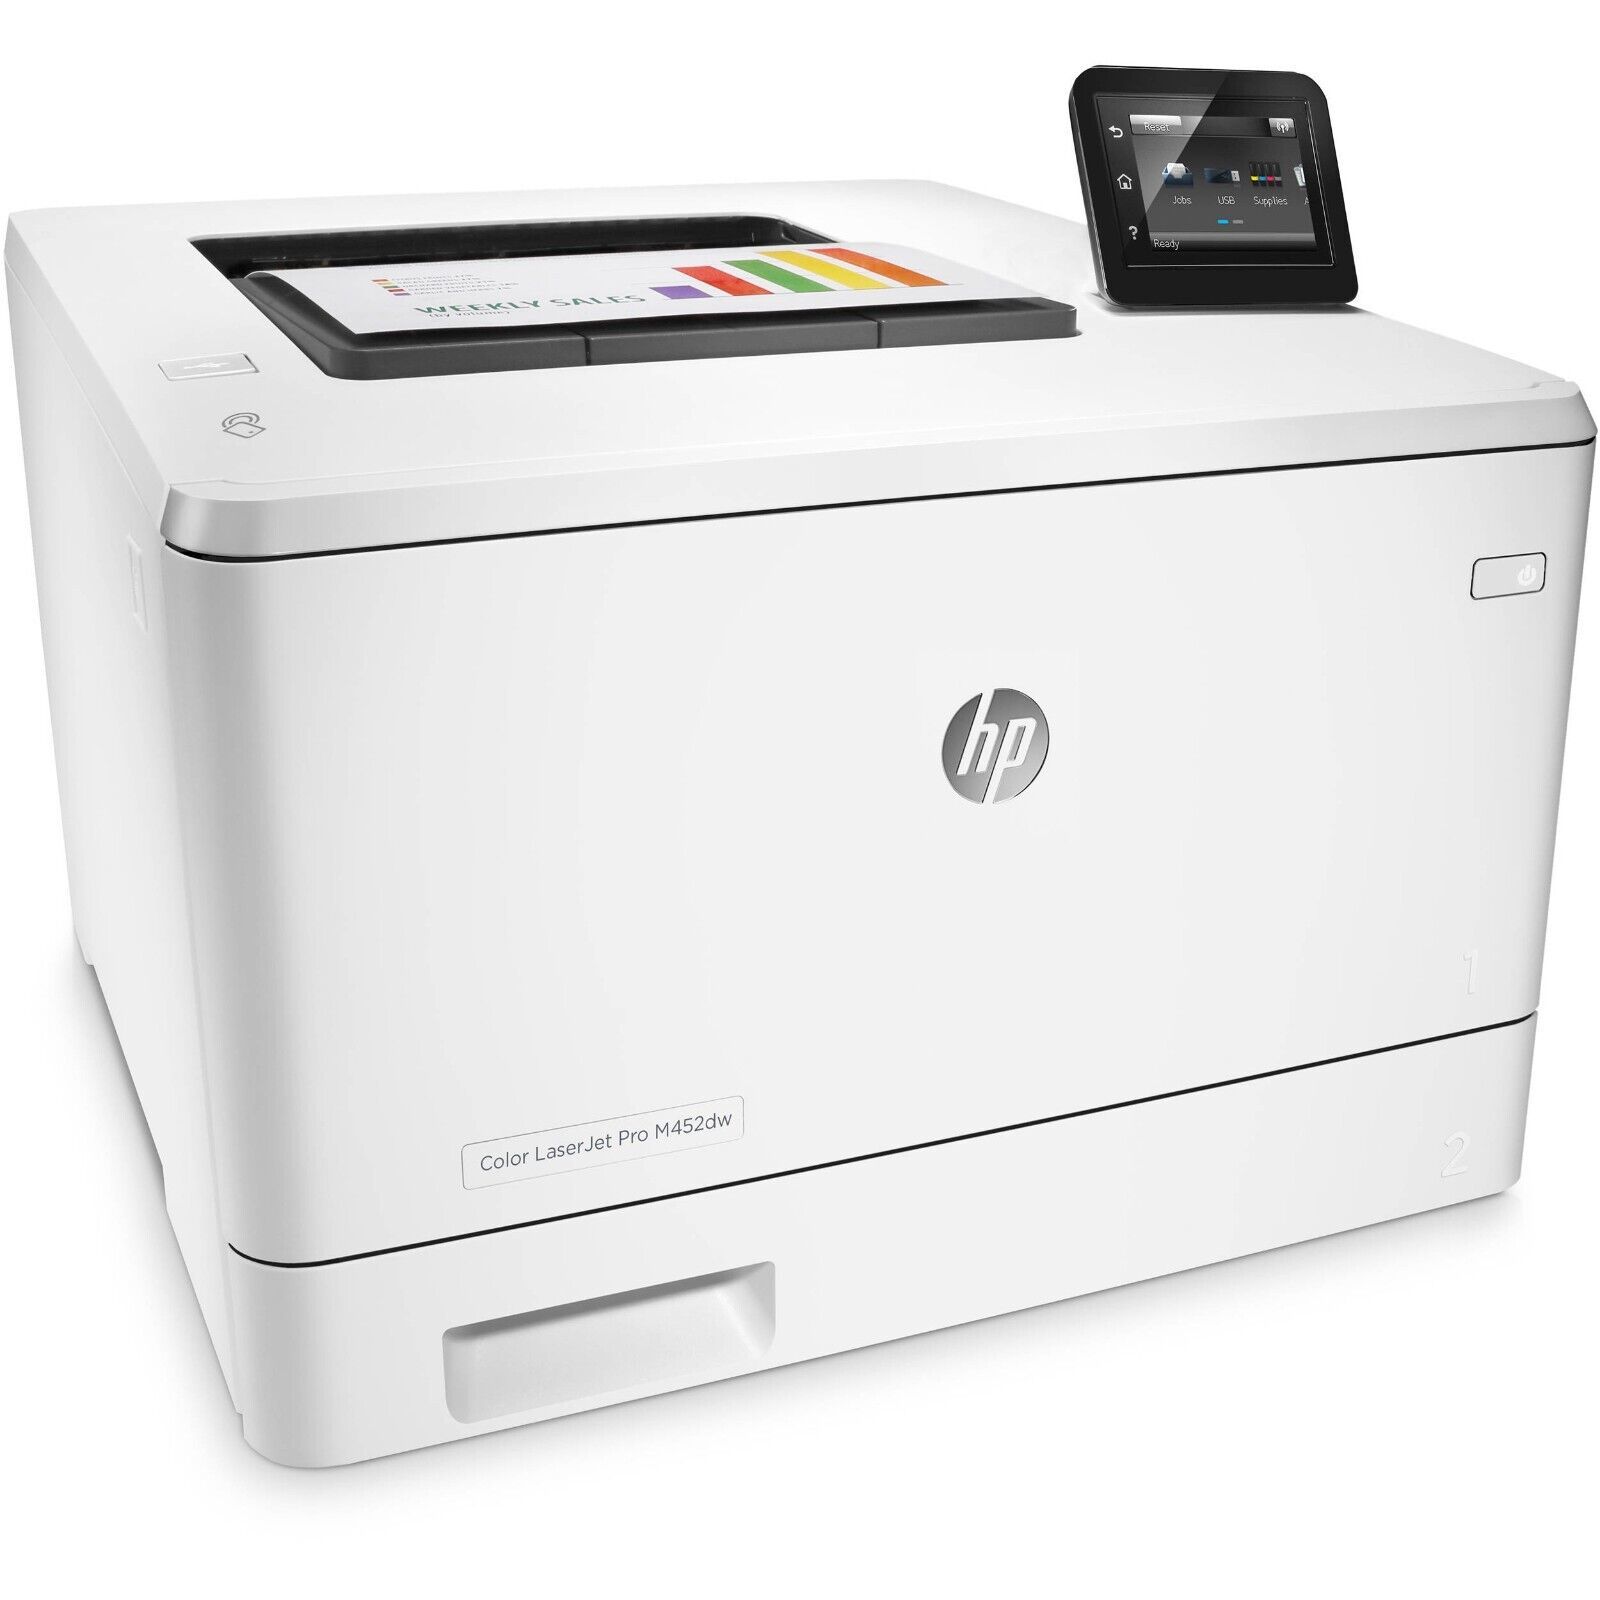 Primary image for HP Color LaserJet Pro M452dn Laser Printer-CF394A Very Low Pages, WORKS GREAT